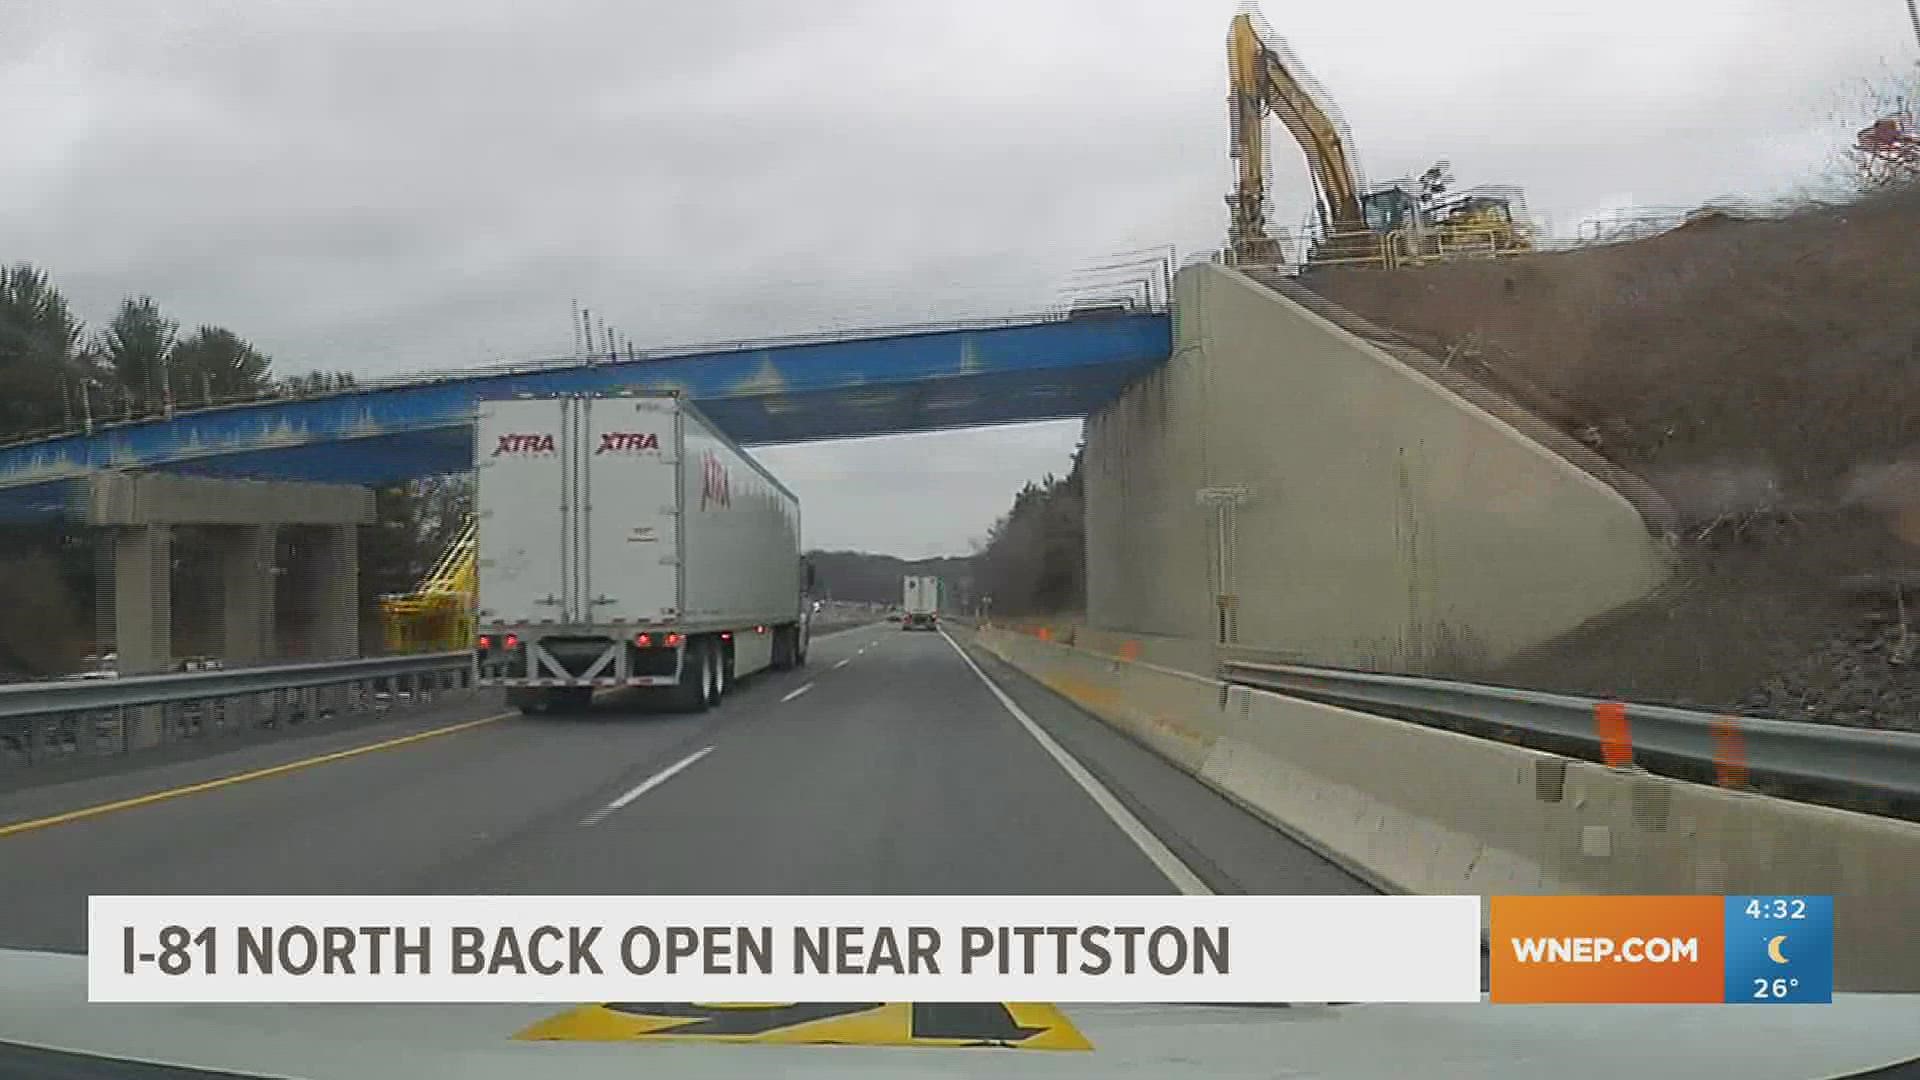 Northbound lanes of I-81 closed at 8 p.m. Tuesday, according to PennDOT.